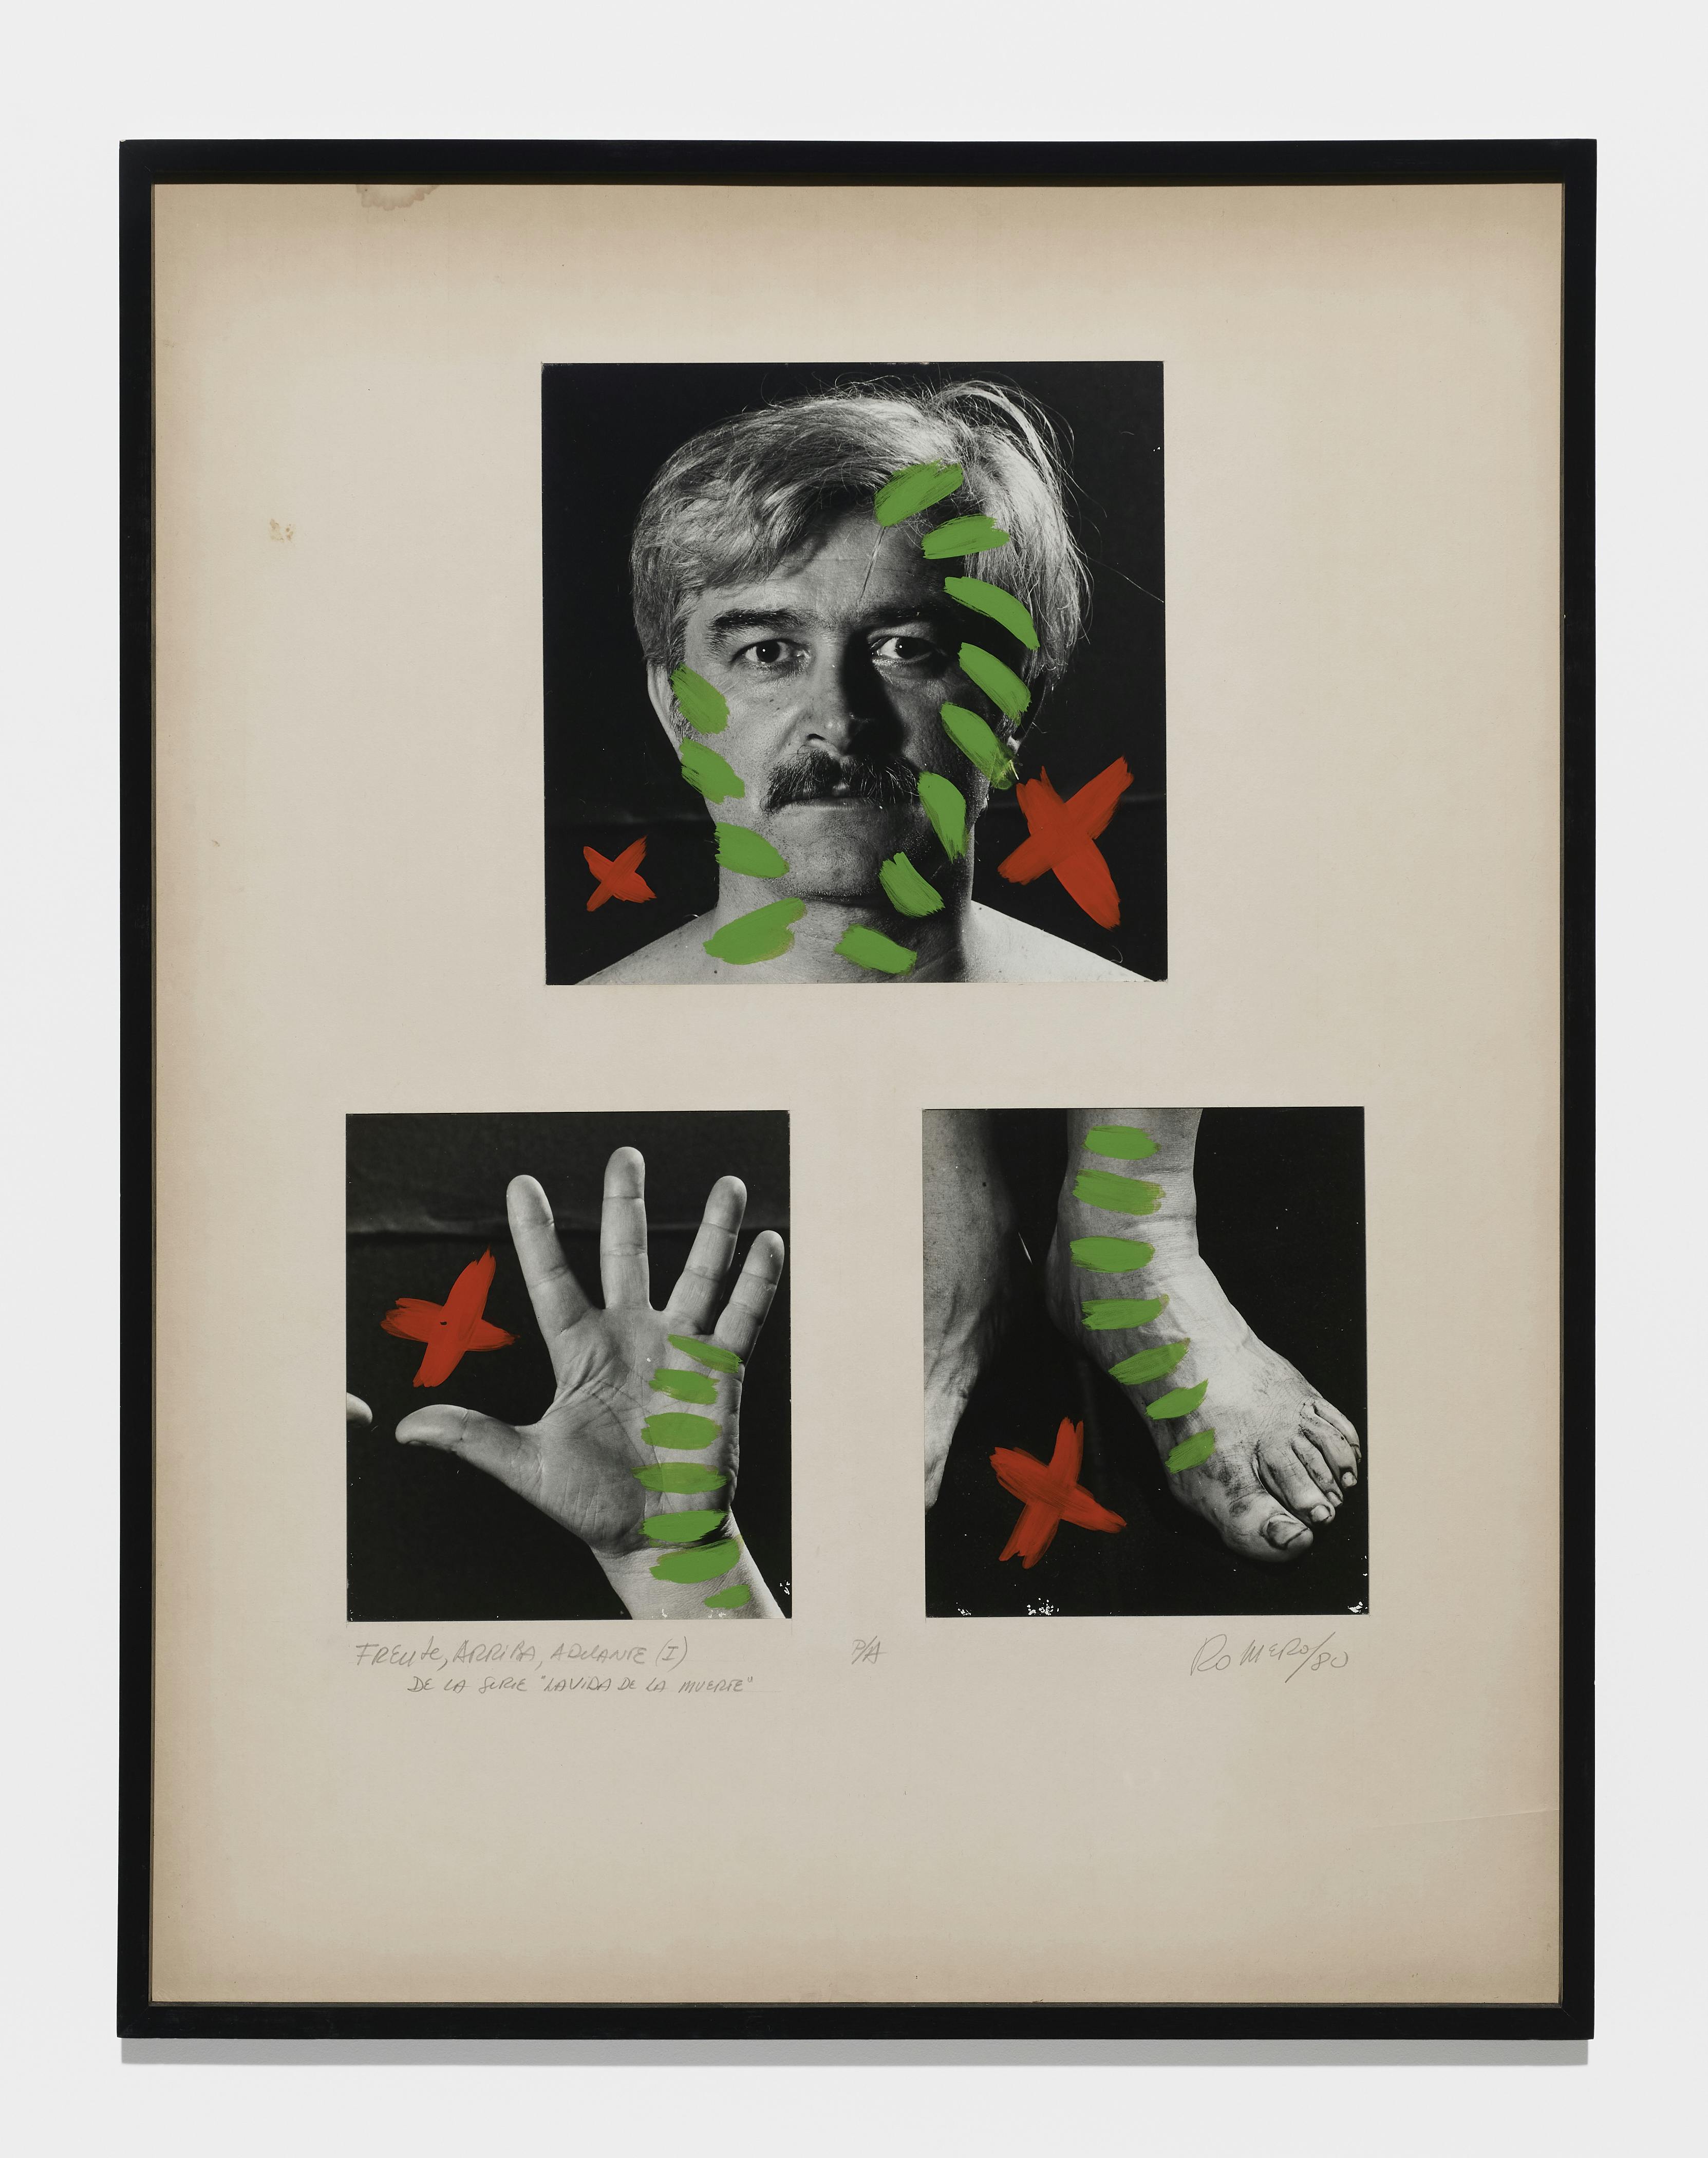 On a sheet of white paper there are three black-and-white photographs arranged in two rows. In the top row is a single photograph of the artist Juan Carlos Romero that looks somewhat like a mugshot. In the bottom row there is a photo of an open hand and another one of the top of a foot. On each of these images, bright red X’s and green striping are painted over the top. The X’s appear in the negative space around the edges of the body parts, while the green striping covers parts of the body near the edges.